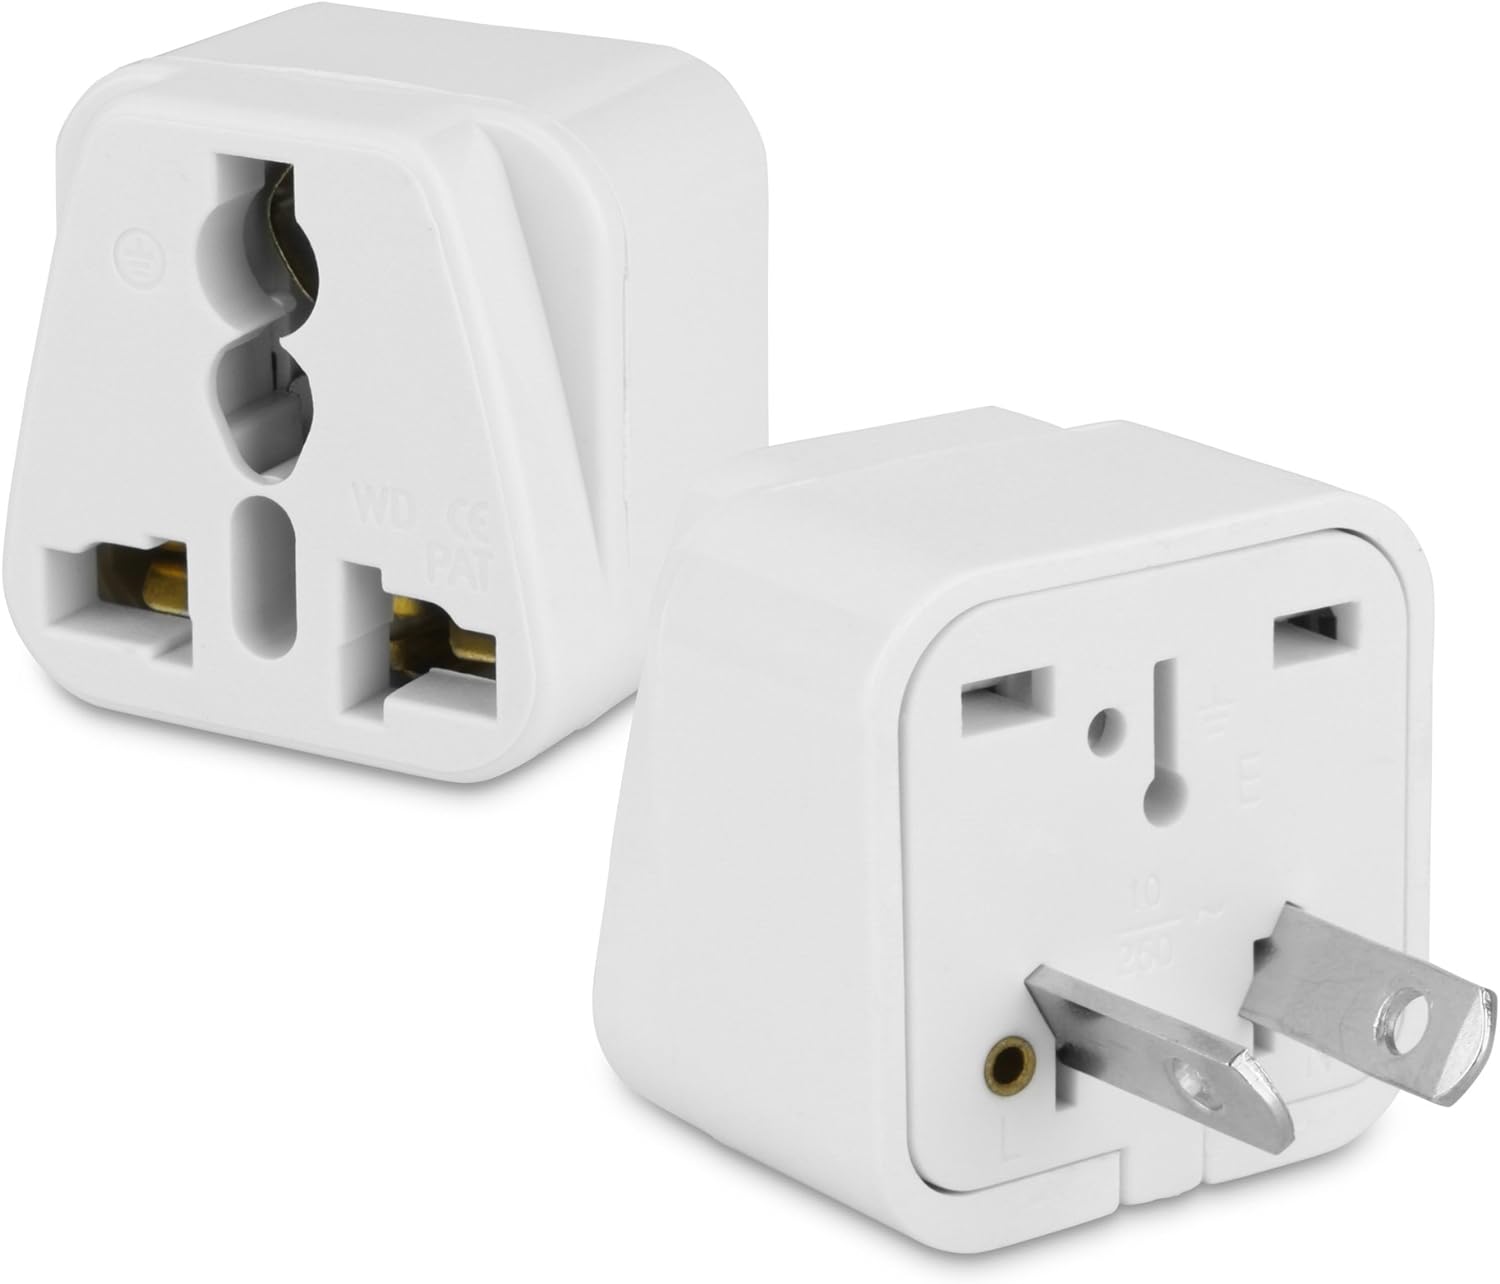 Universal to Australian Type I Outlet Plug Adapter, Charger for Smartphones and Tablets